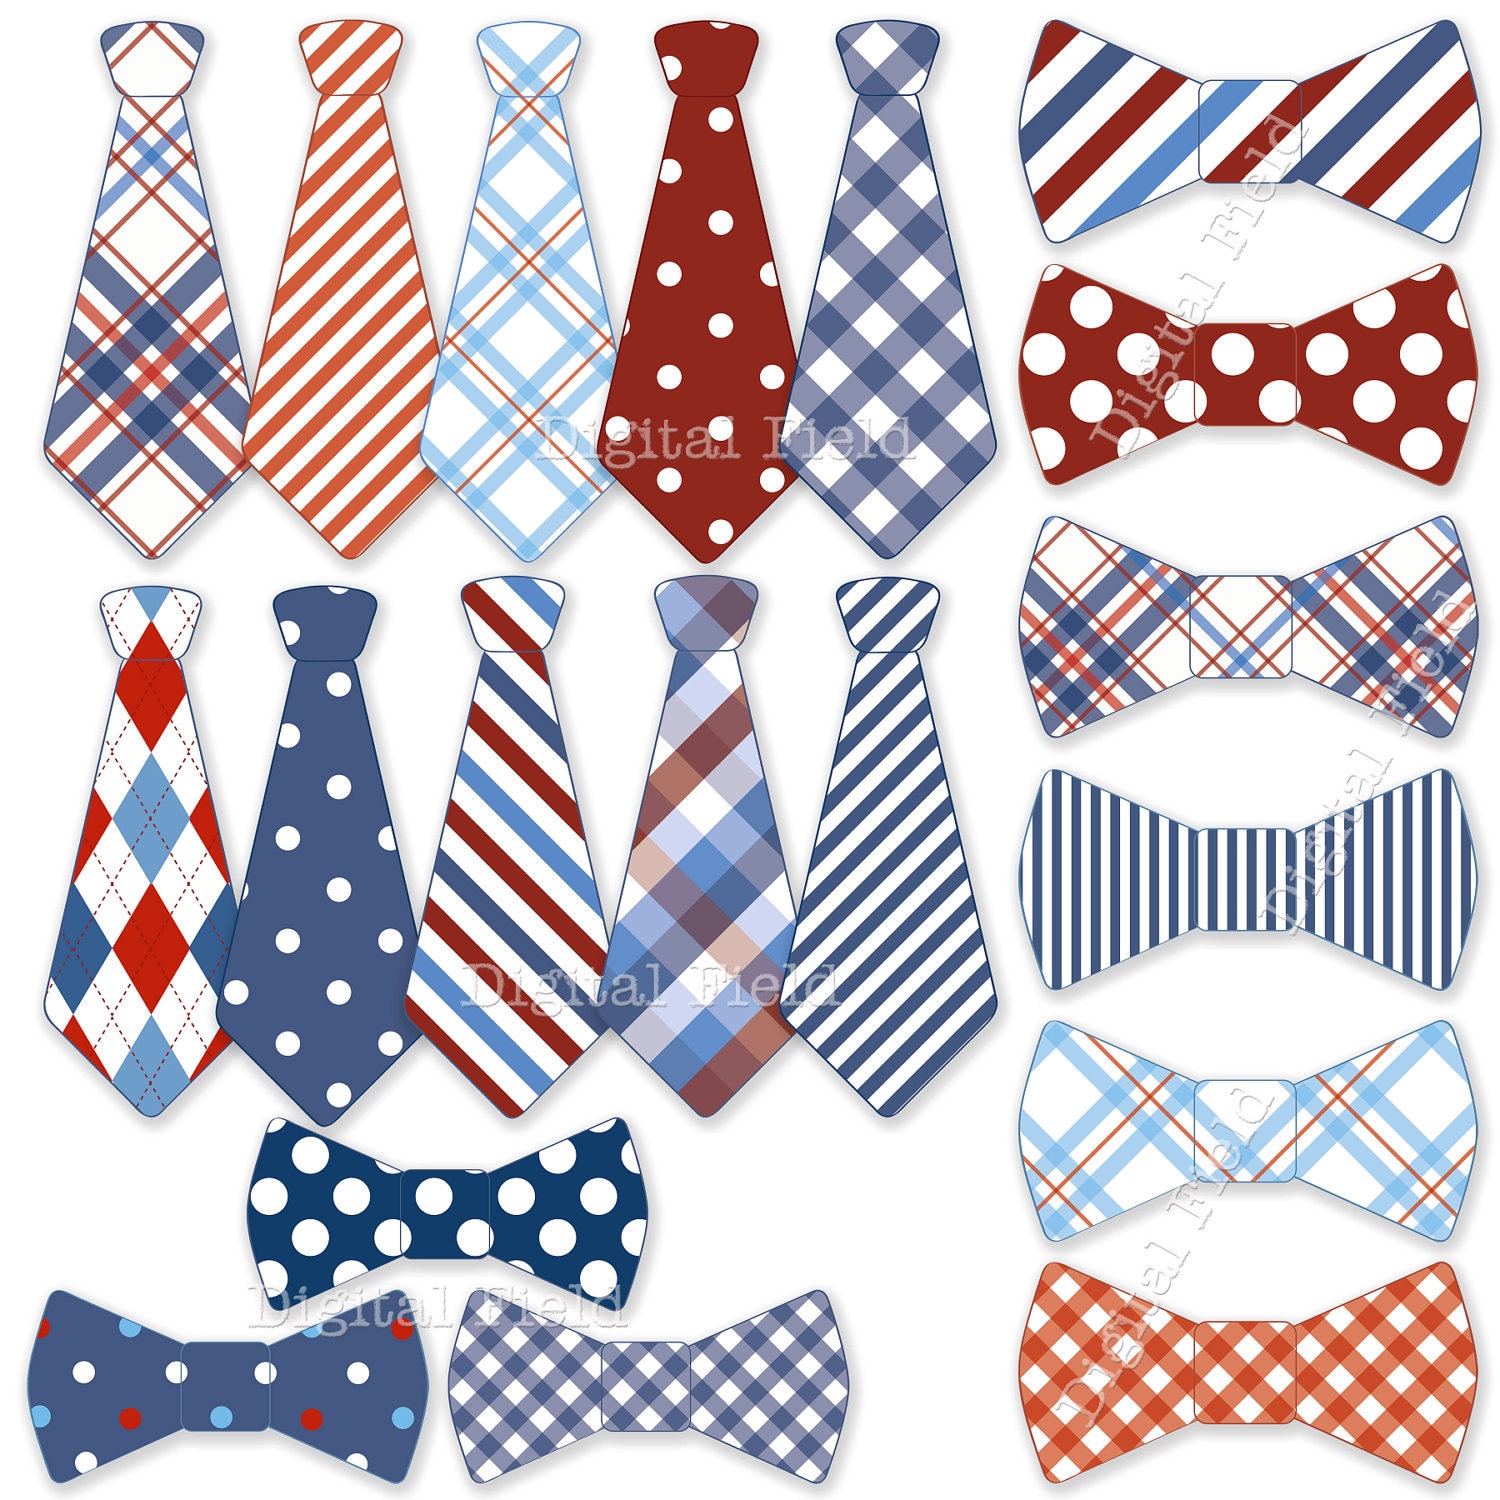 red tie clipart - photo #36